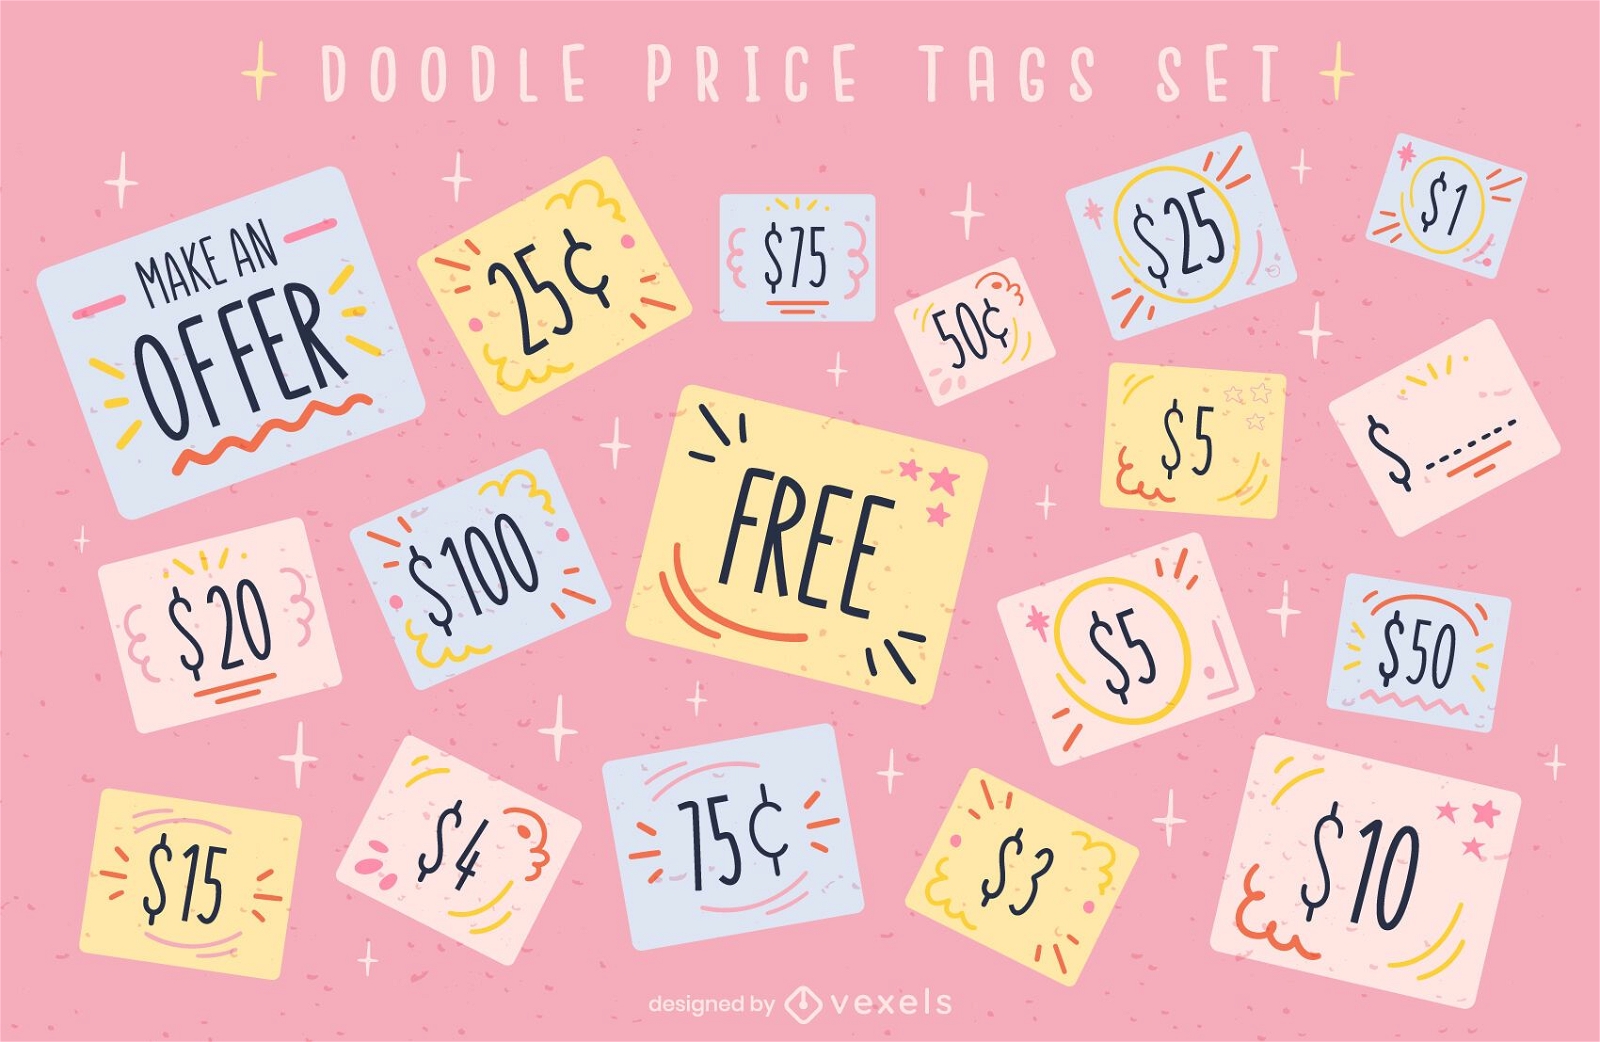 Price tag offers cute doodle set